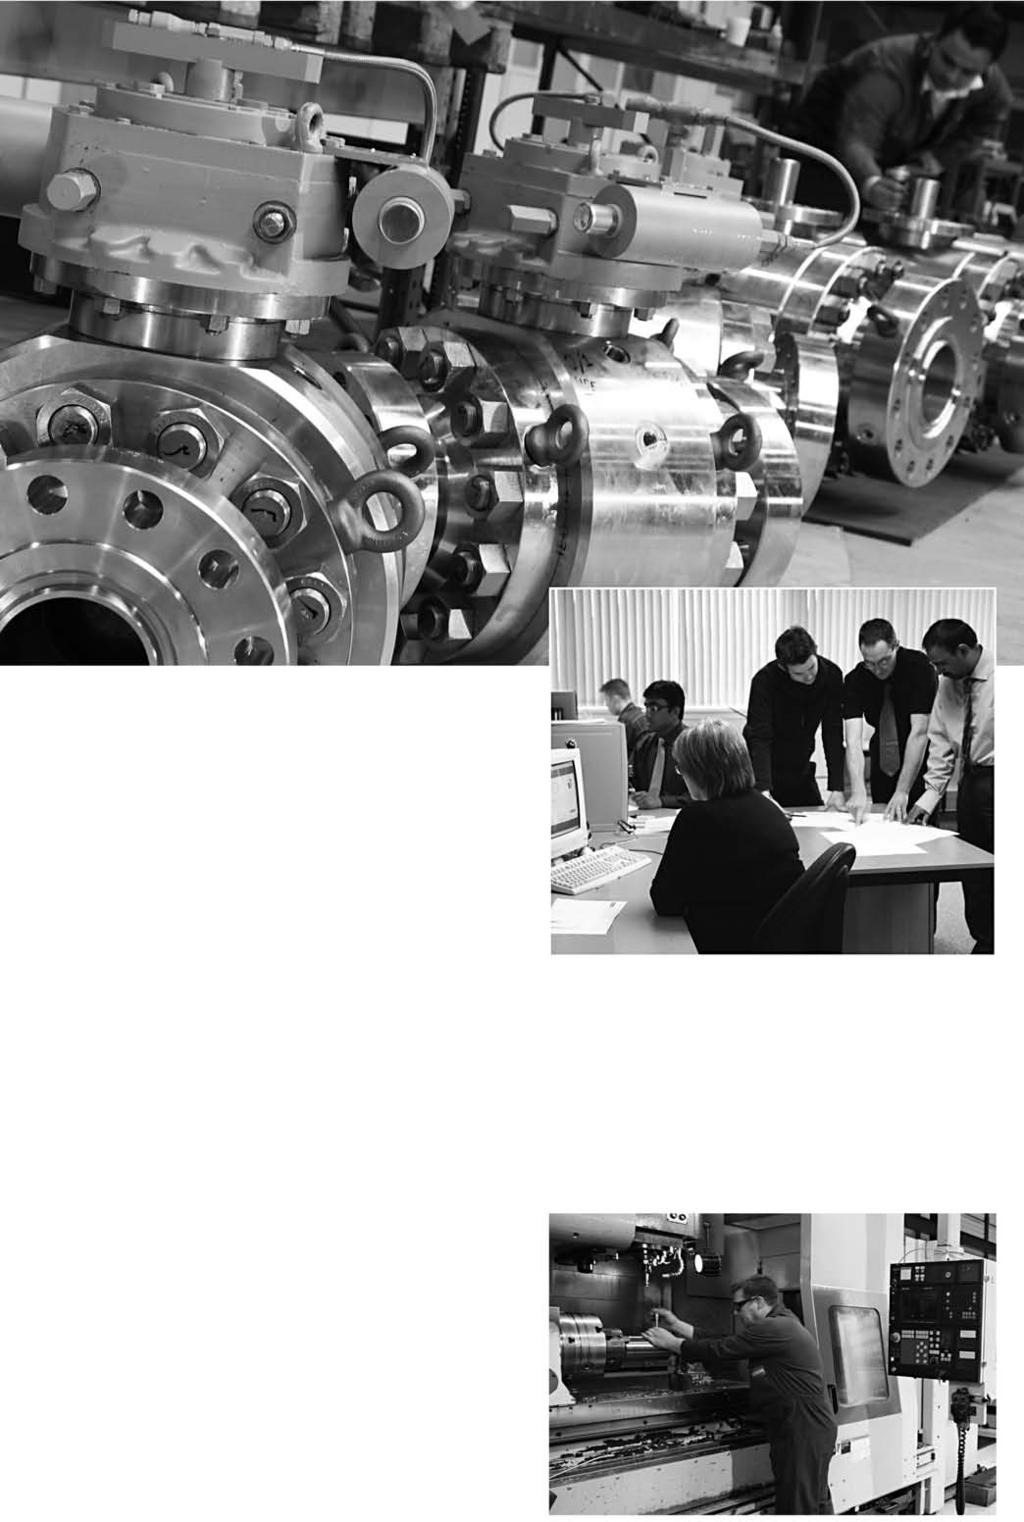 Engineering and Design Pacson Valve s engineering and design capability has been developed through significant investment in manpower, training, hardware and software.